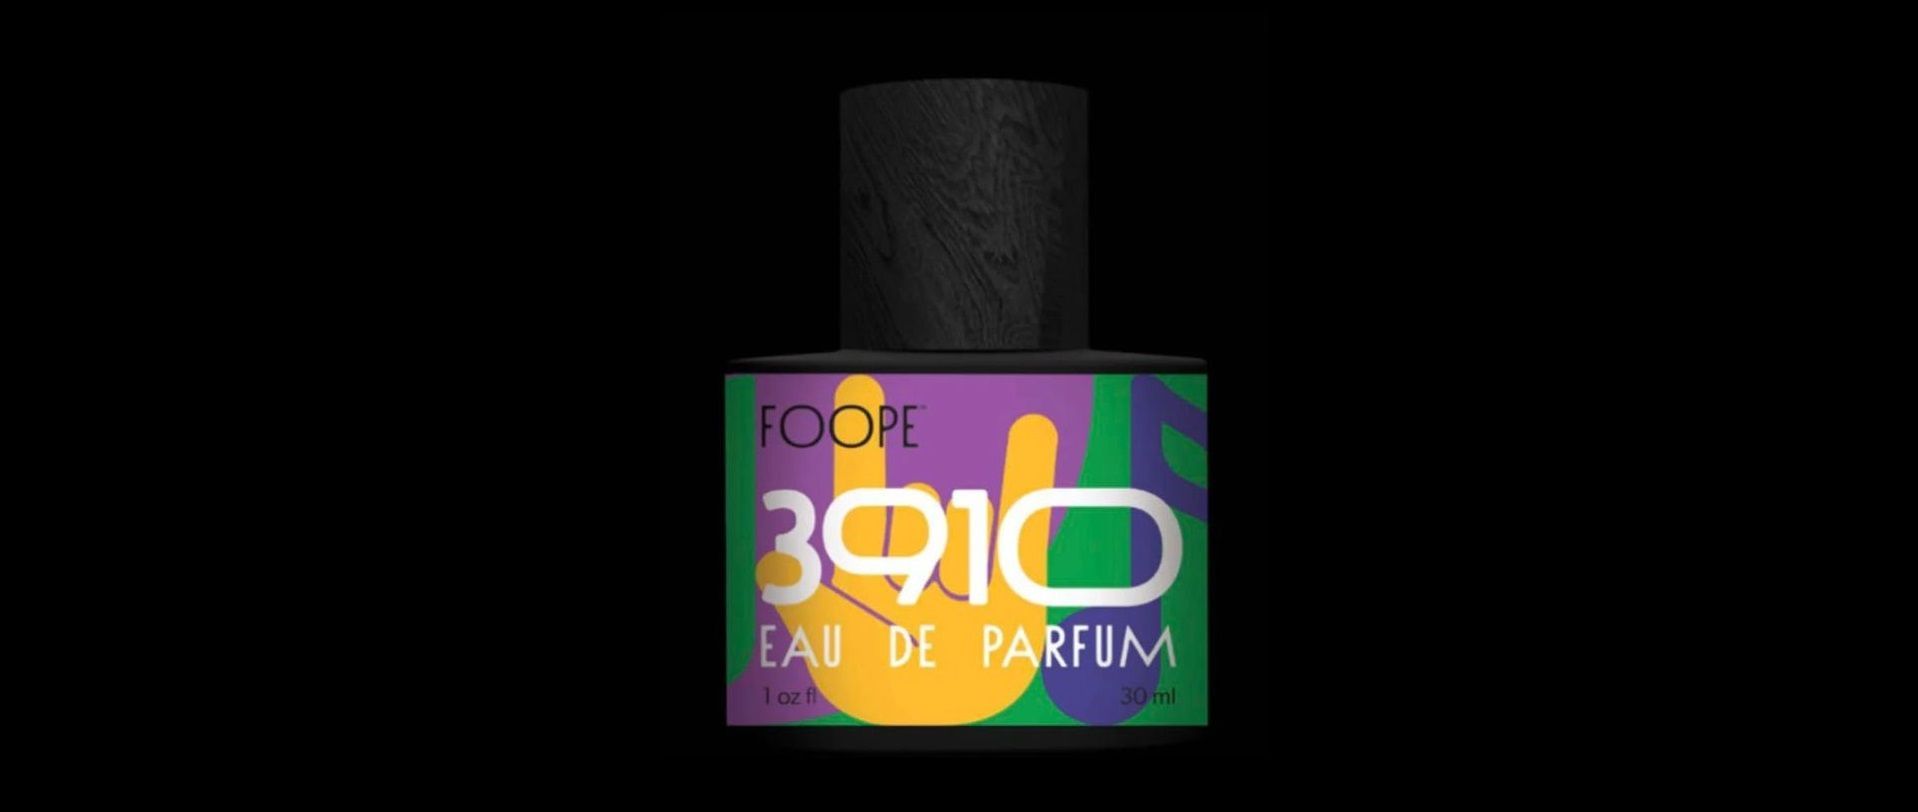 A bottle of perfume with a colorful label on a black background.